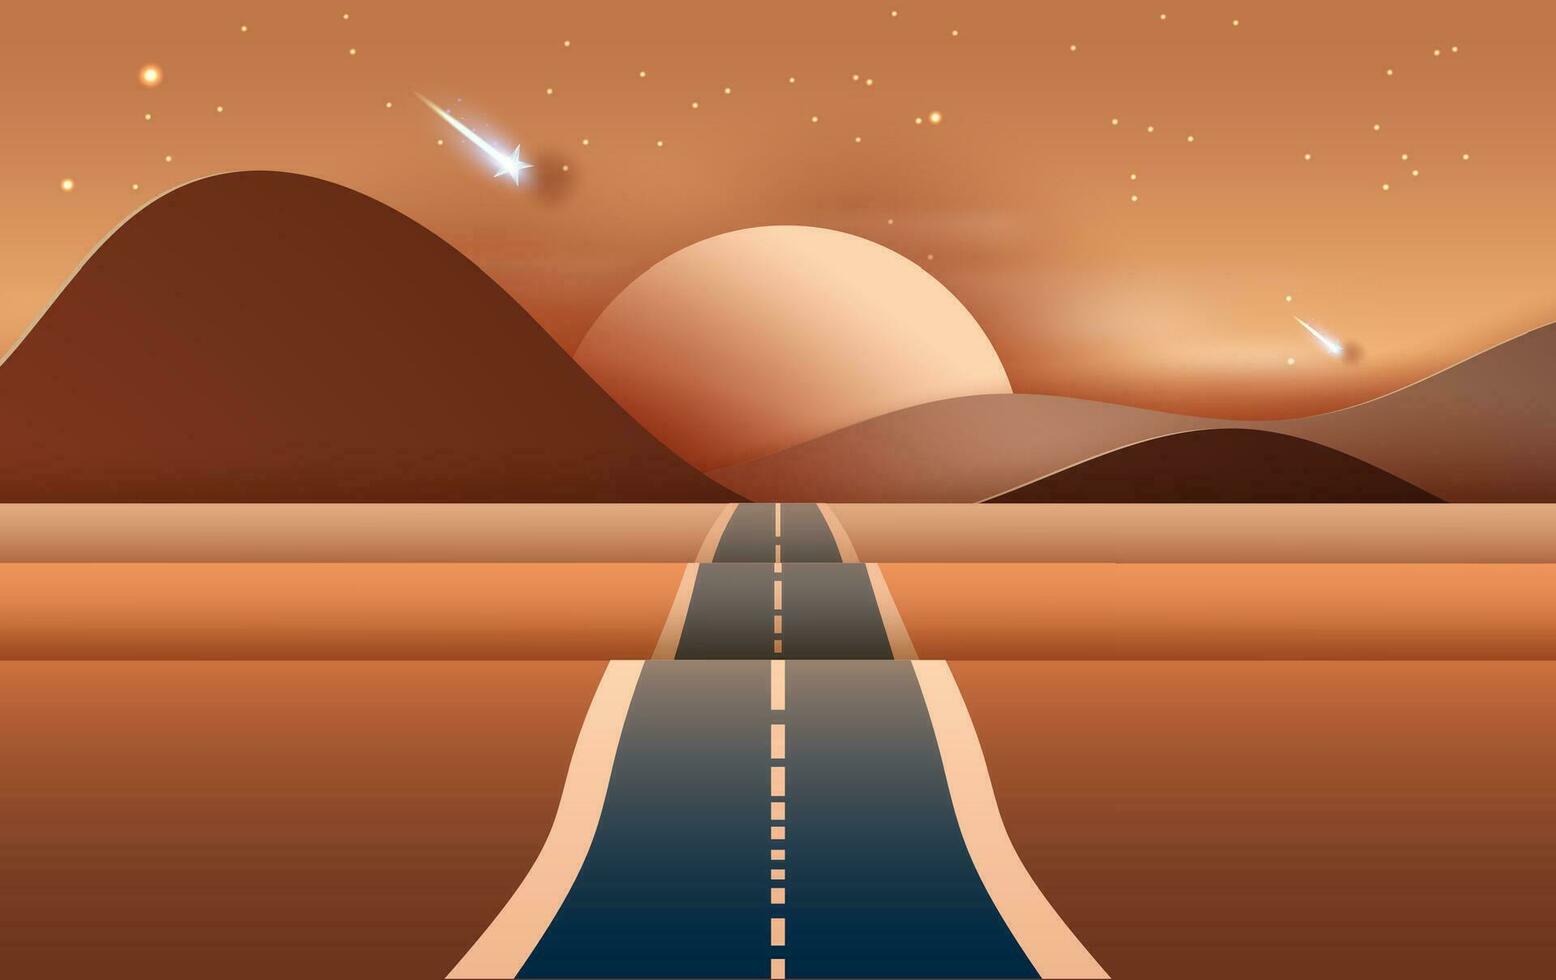 3D illustration of  Landscape with road to mountains across a dry desert.Light starfall at Evening time.Creative design Paper cut and craft by carving of hot summertime show sand dune. Vector. Eps10 vector